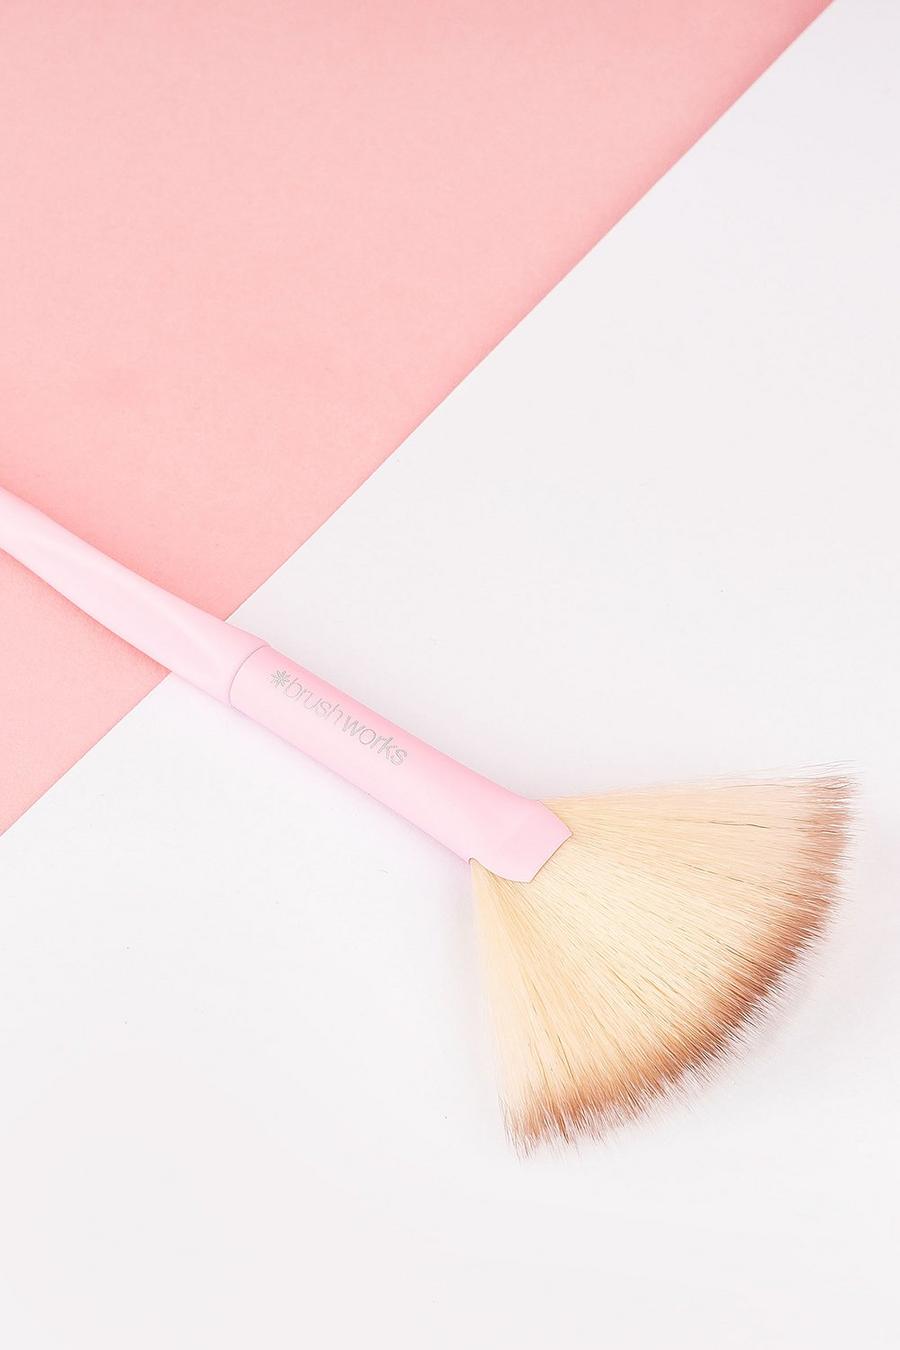 Brushworks - Pinceau éventail, Baby pink rosa